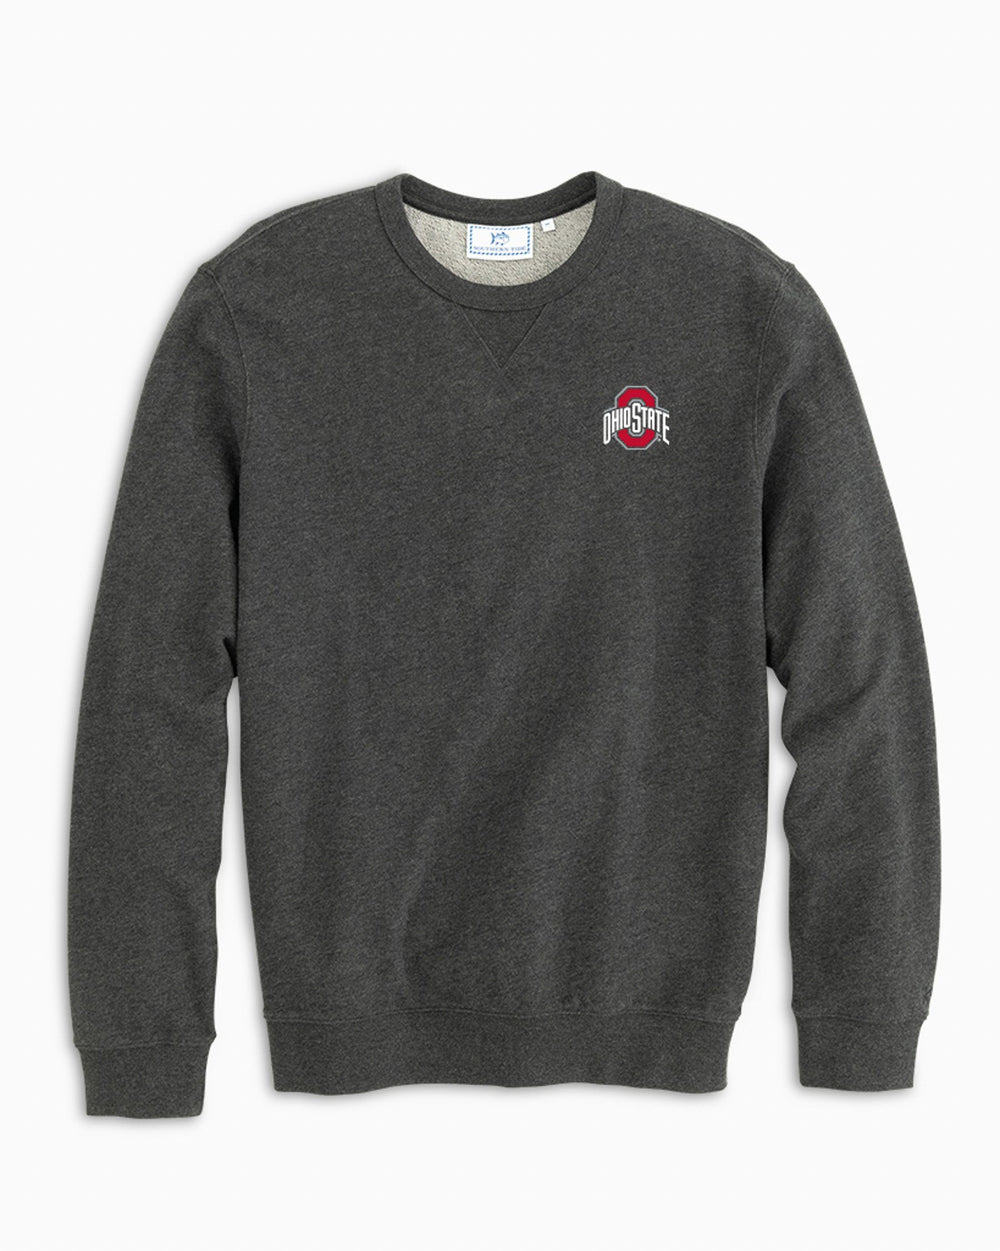 The front of the Men's Ohio State Buckeyes Upper Deck Pullover Sweatshirt by Southern Tide - Heather Black